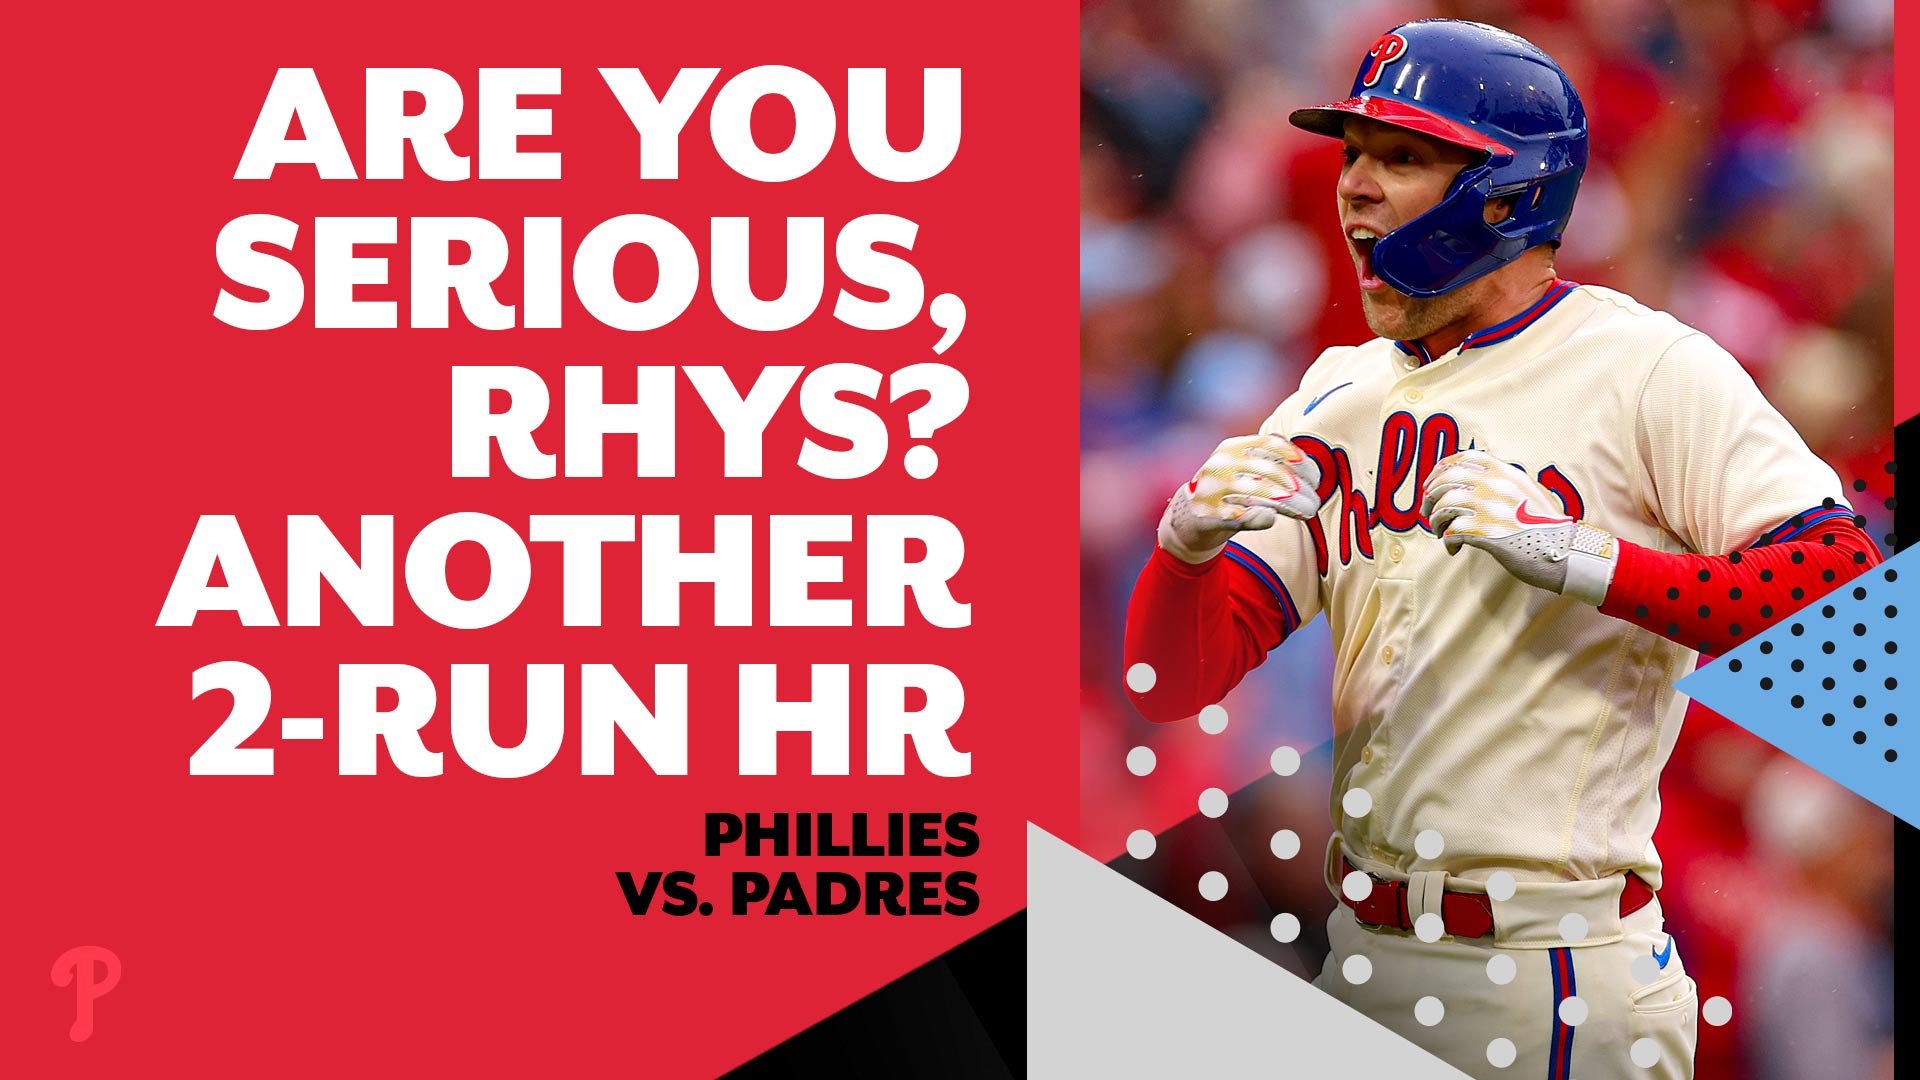 For the third time in two days, Rhys Hoskins has a clutch home run